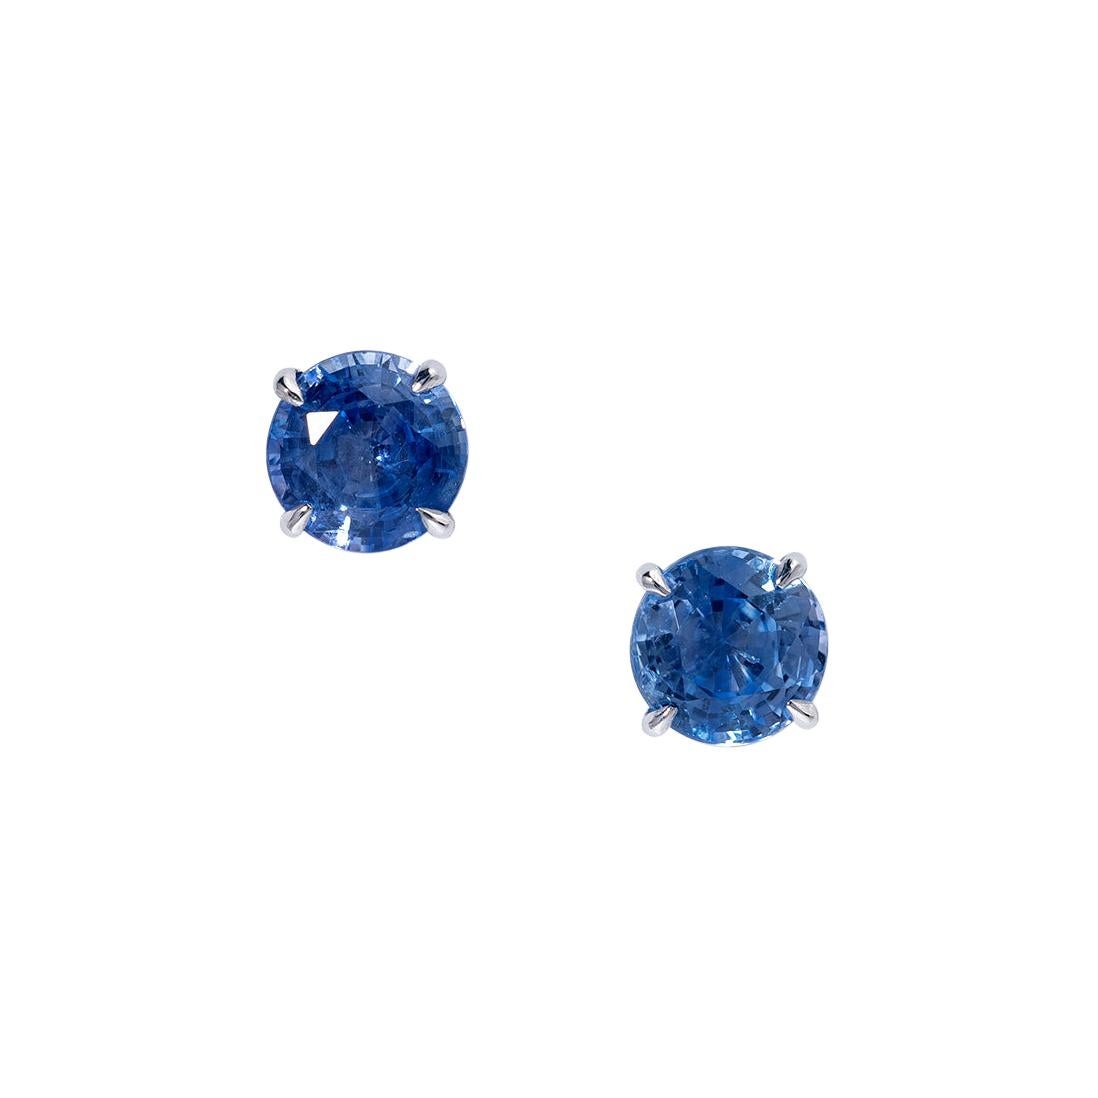 Round Blue Sapphire Stud Earrings in 18 Karat White Gold For Sale